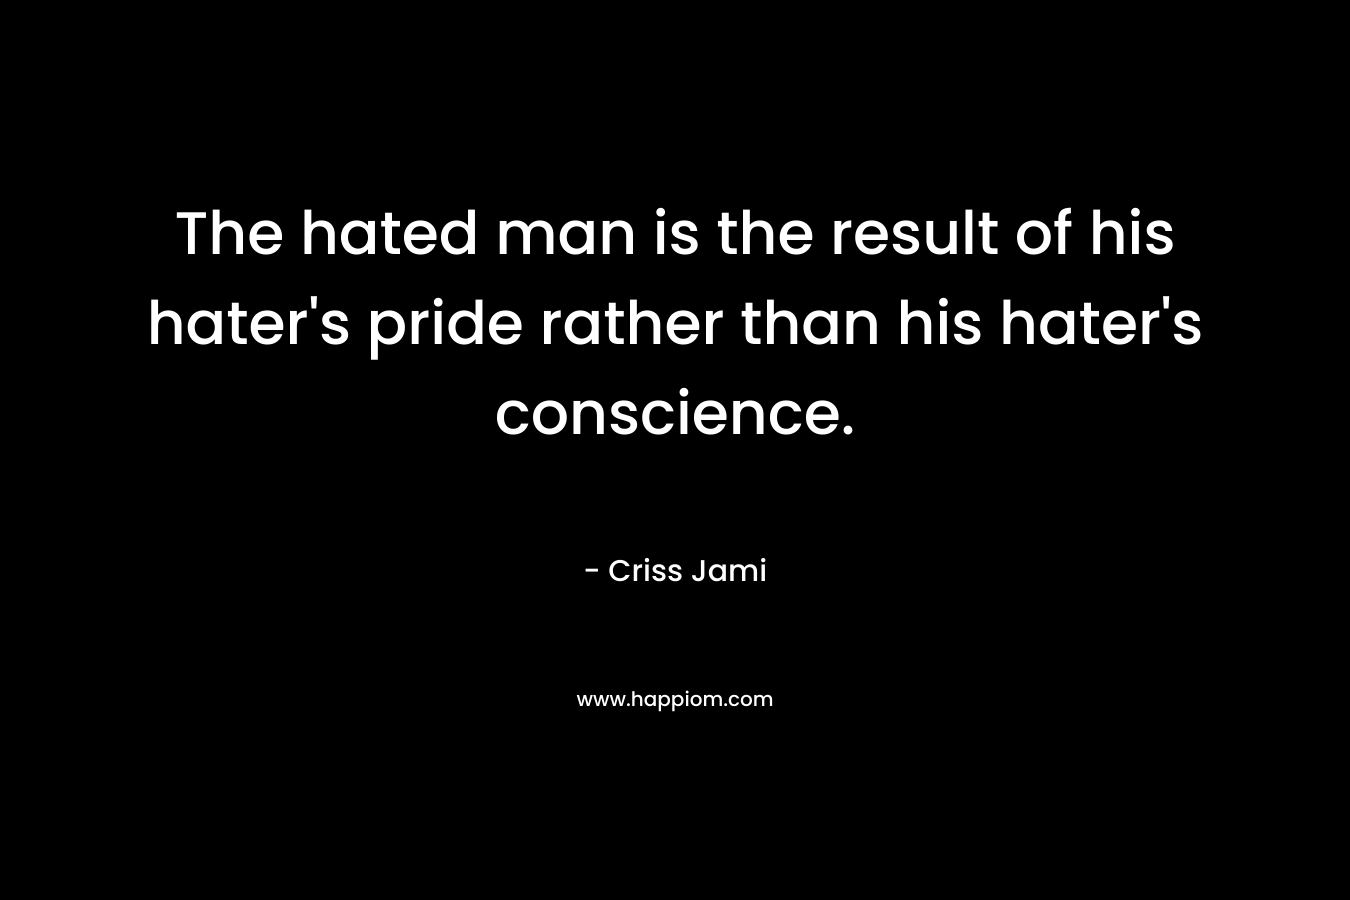 The hated man is the result of his hater's pride rather than his hater's conscience.